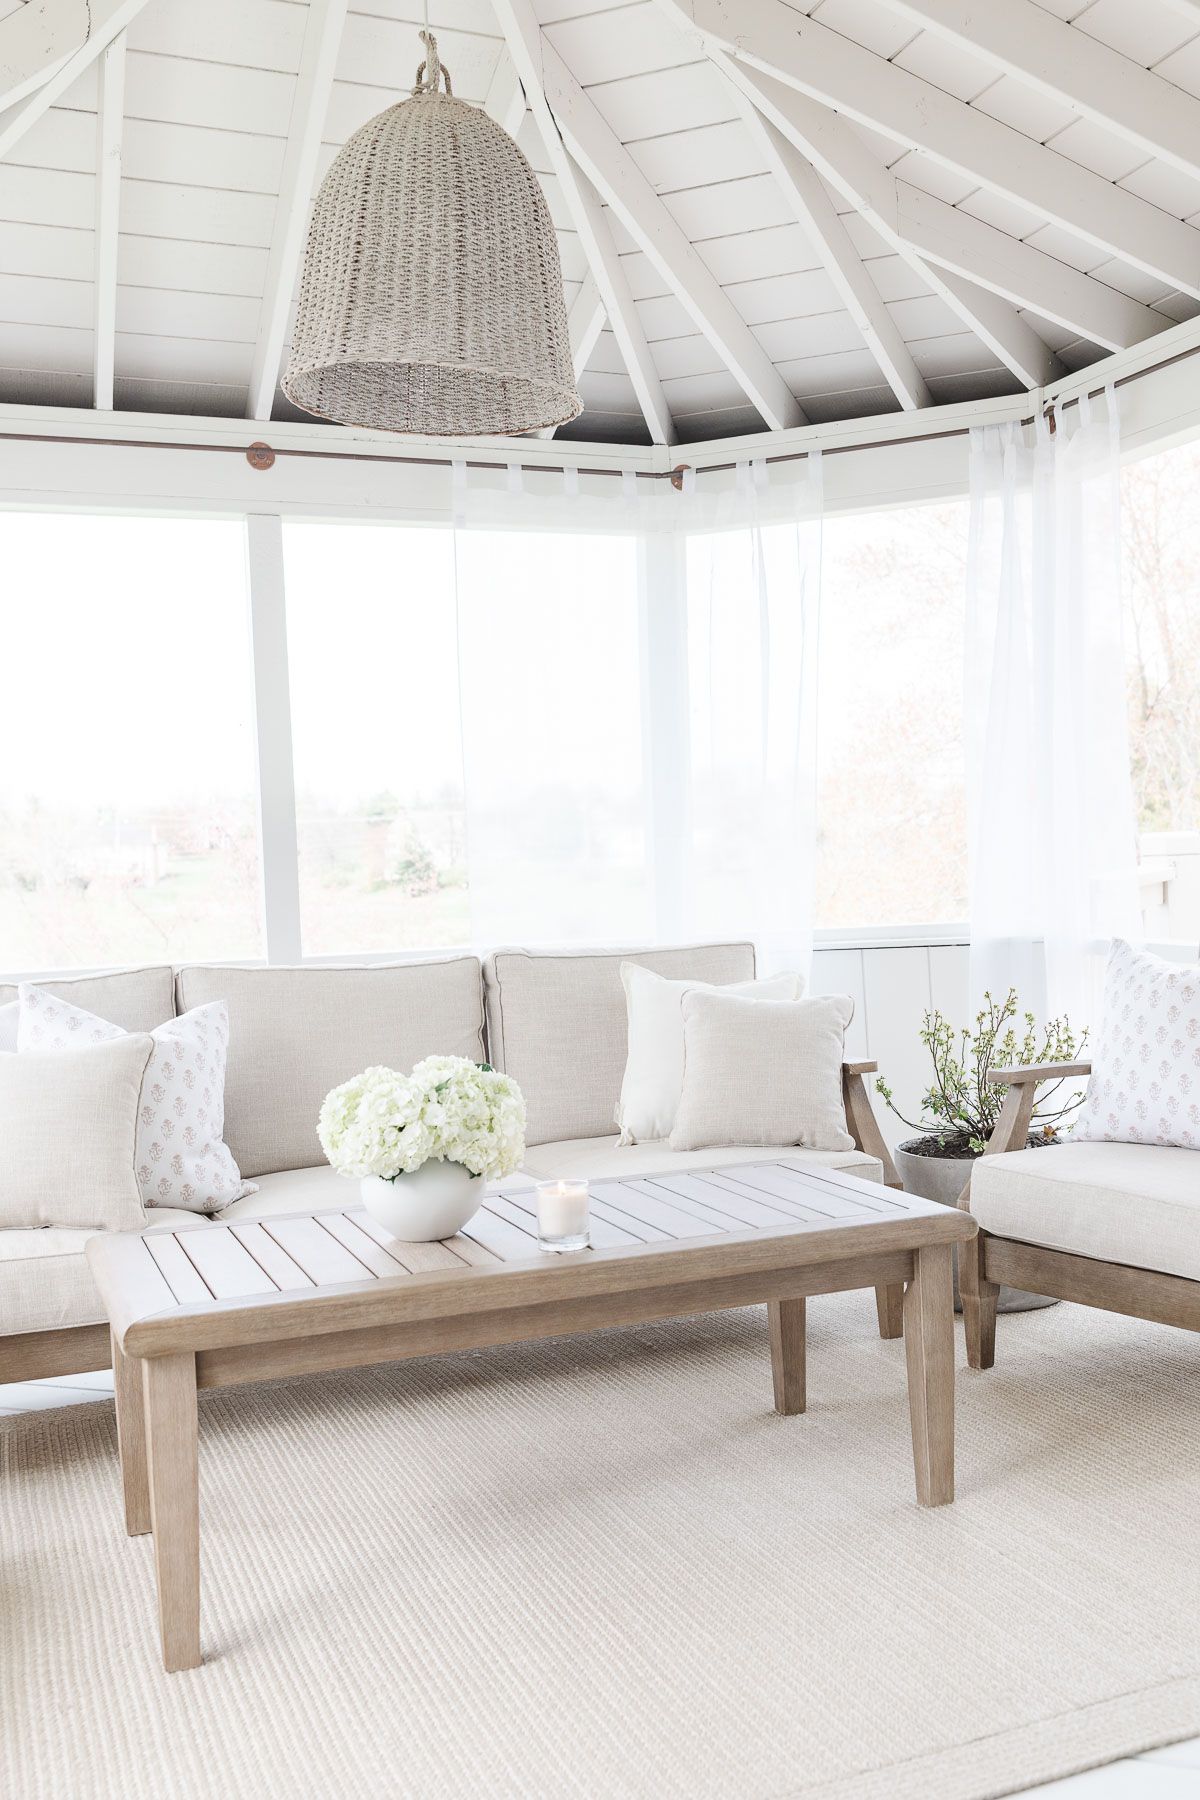 A white screened porch completed with a DIY screen porch kit.